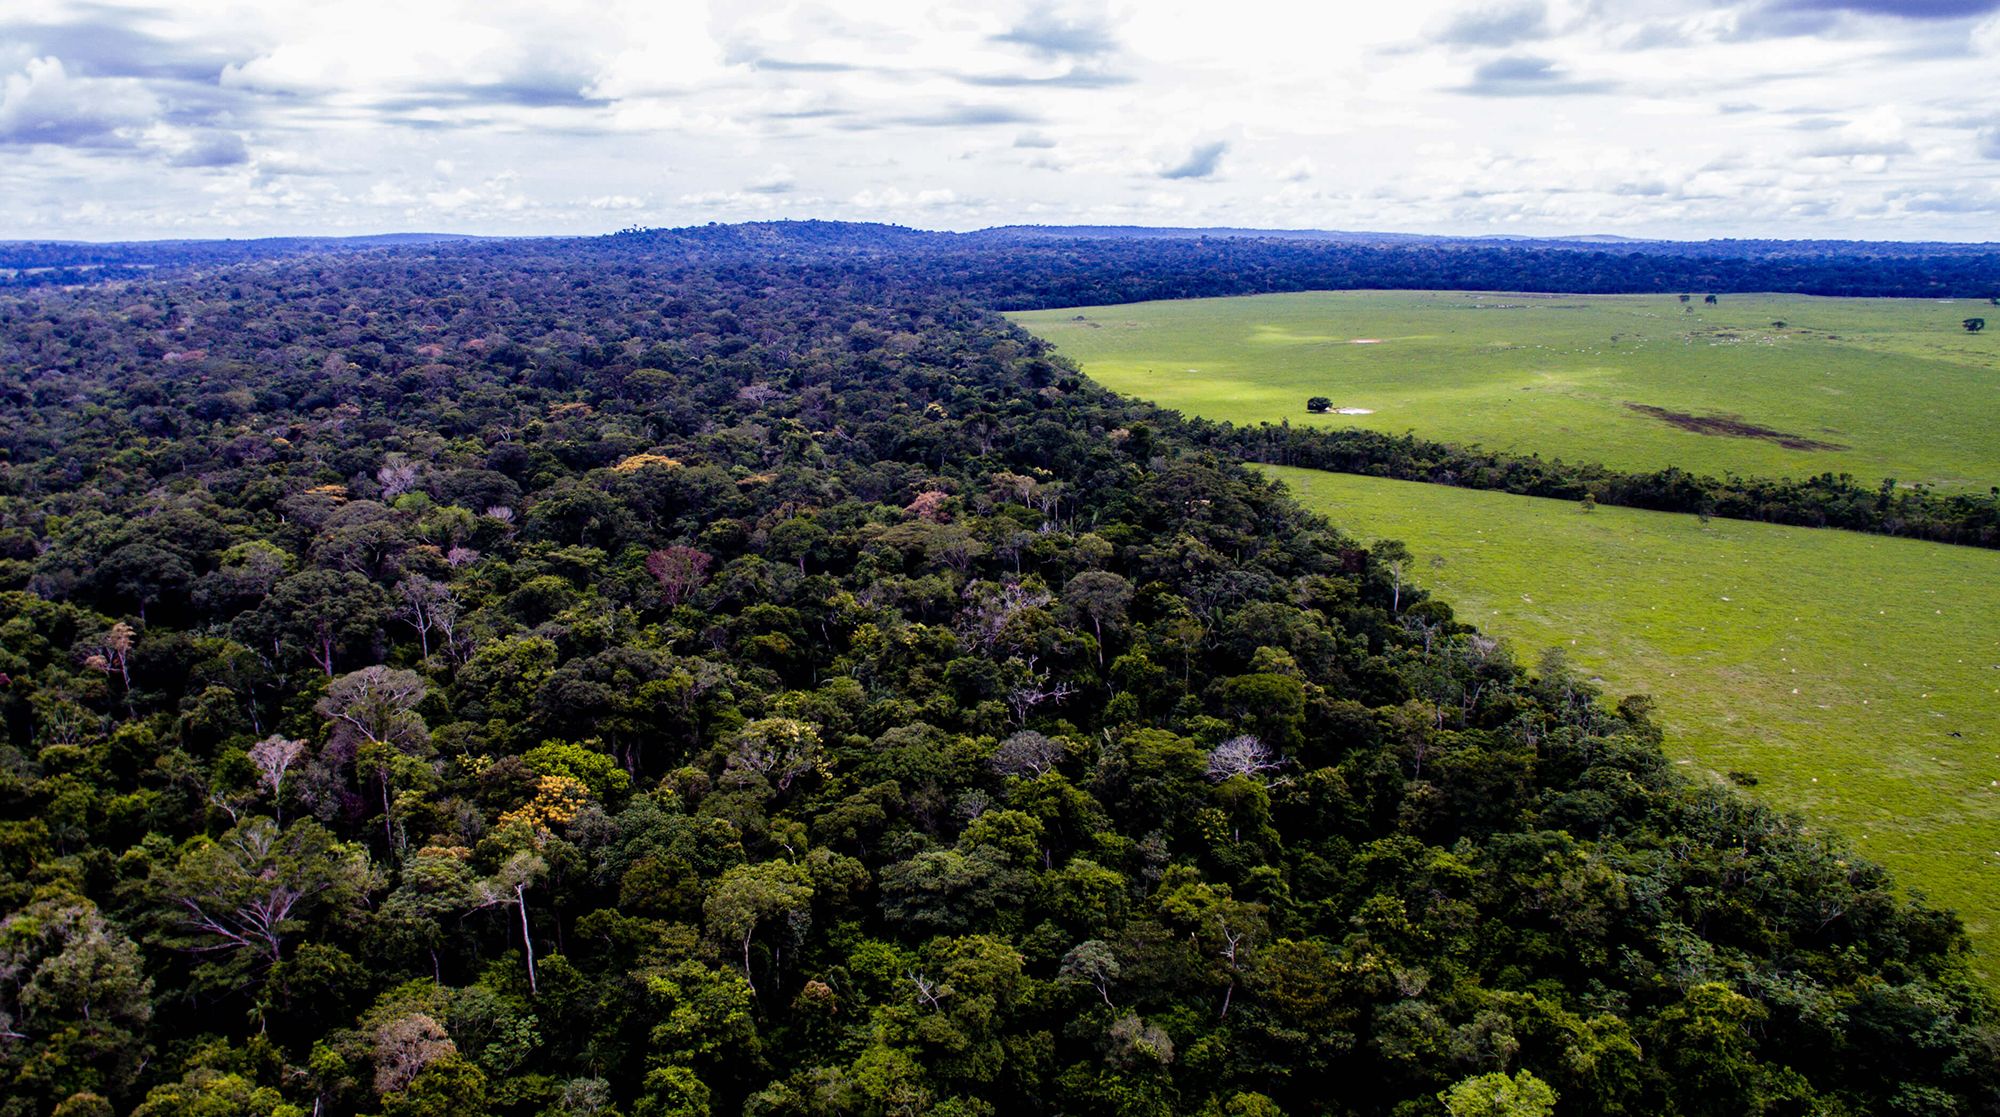 The forest and the farm near the Roosevelt River, Brazil. Image by Caio Mota. Brazil, 2019.